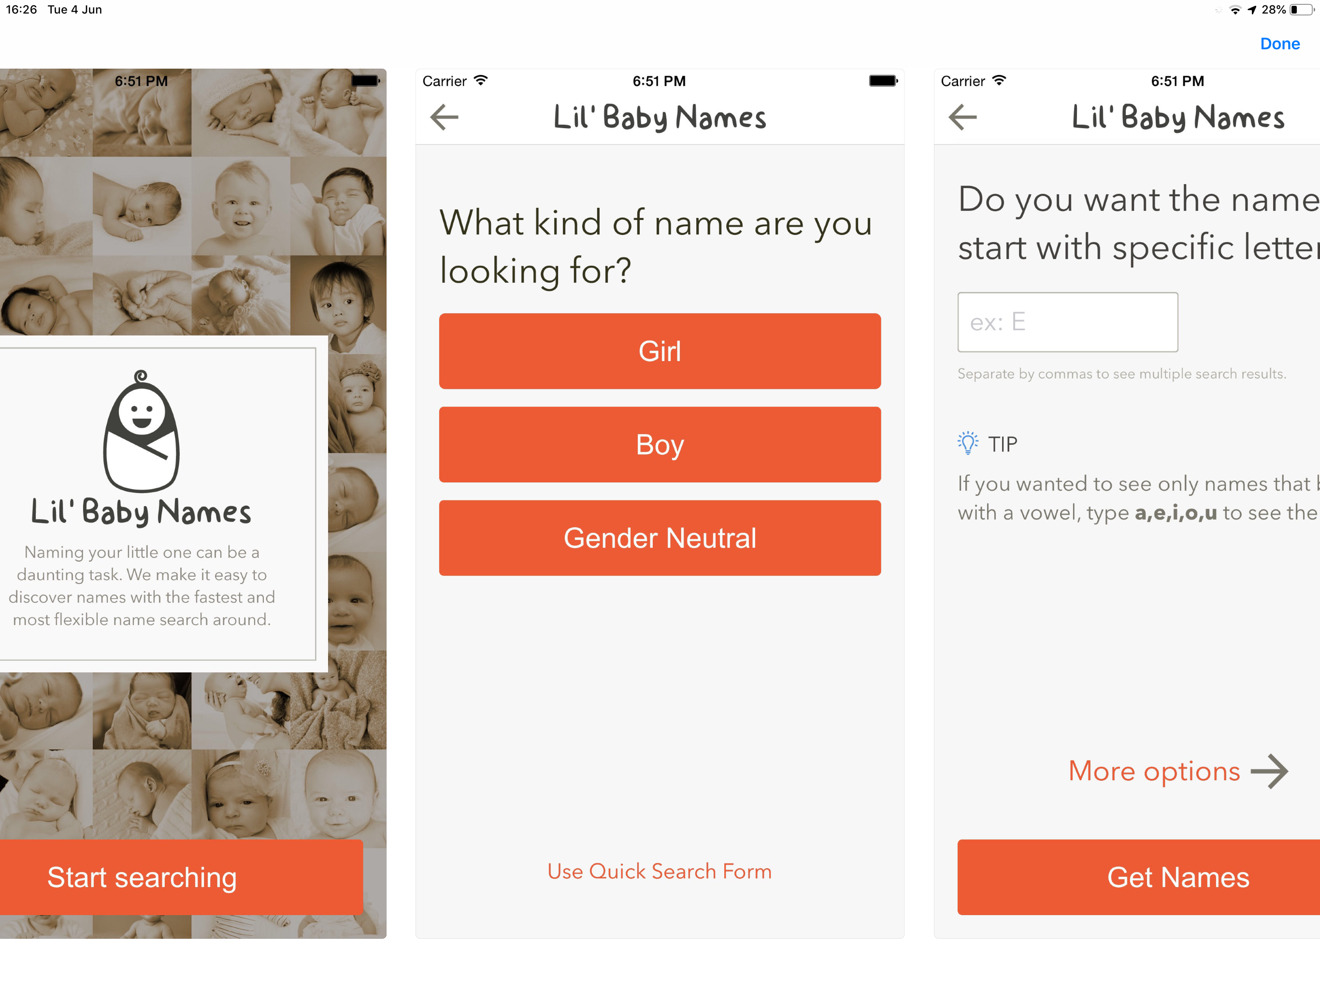 App Store screenshots from Lil' Baby Names, an app by one of the plaintiffs 